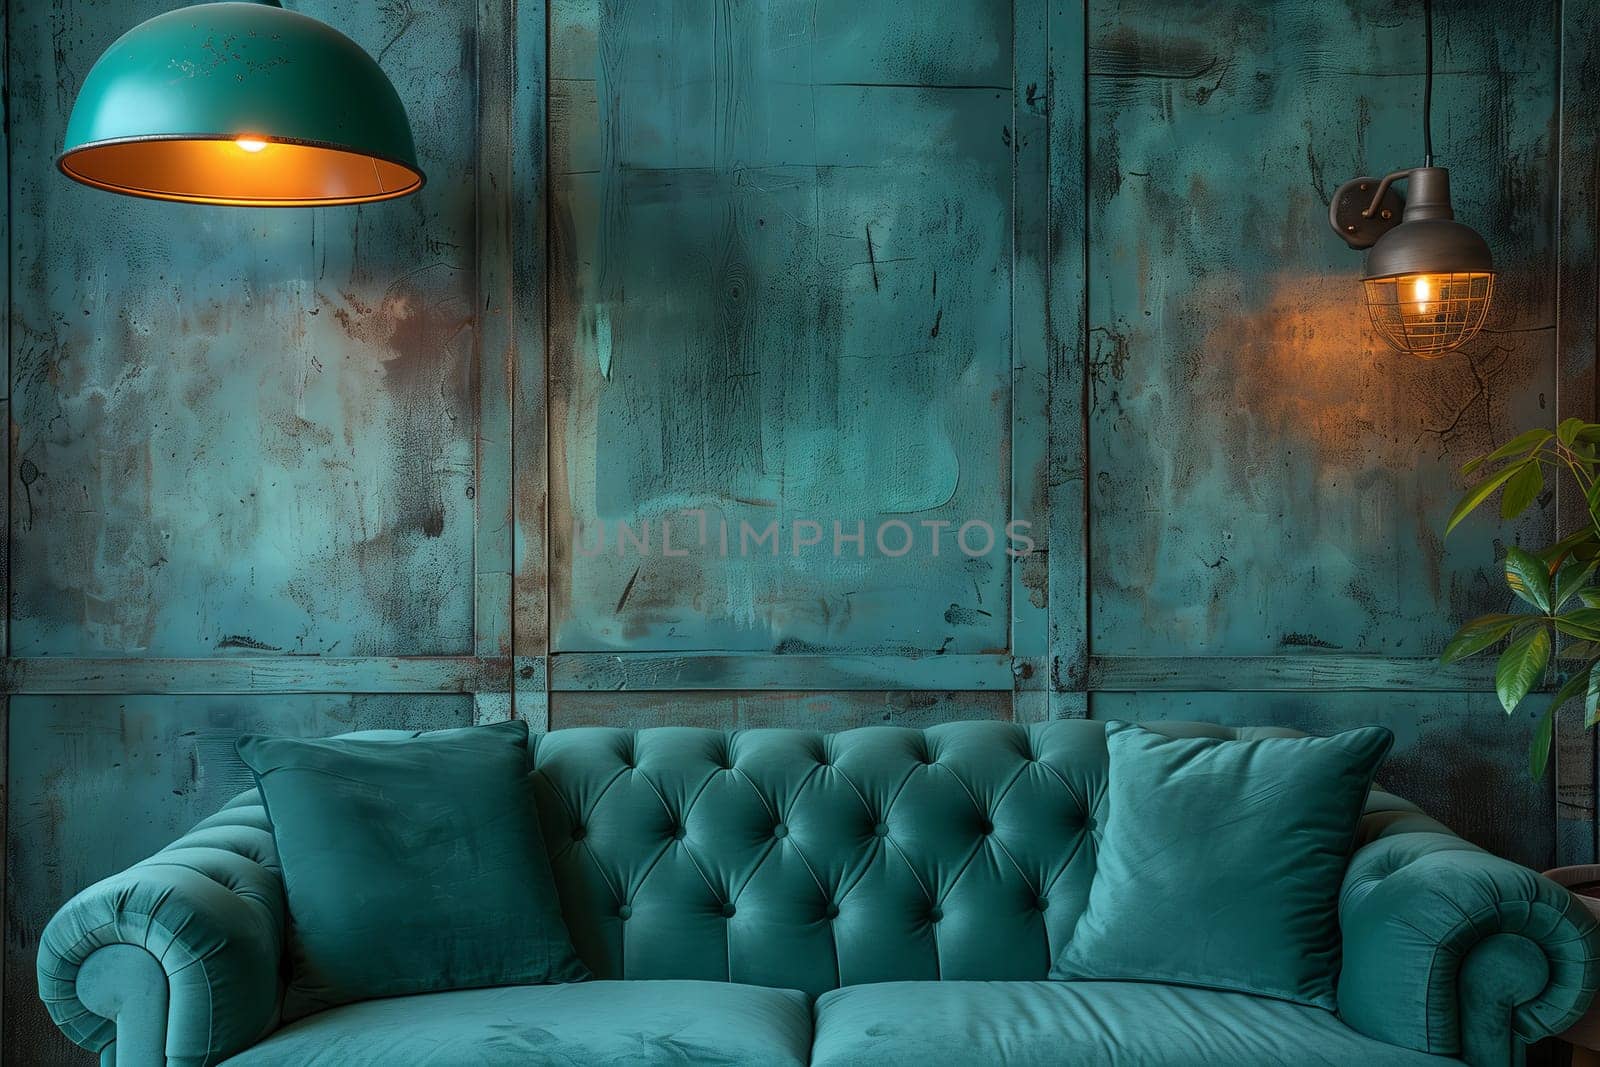 A blue couch is placed in front of a green wall in the living room, creating a calming and harmonious atmosphere with the combination of furniture and natureinspired colors